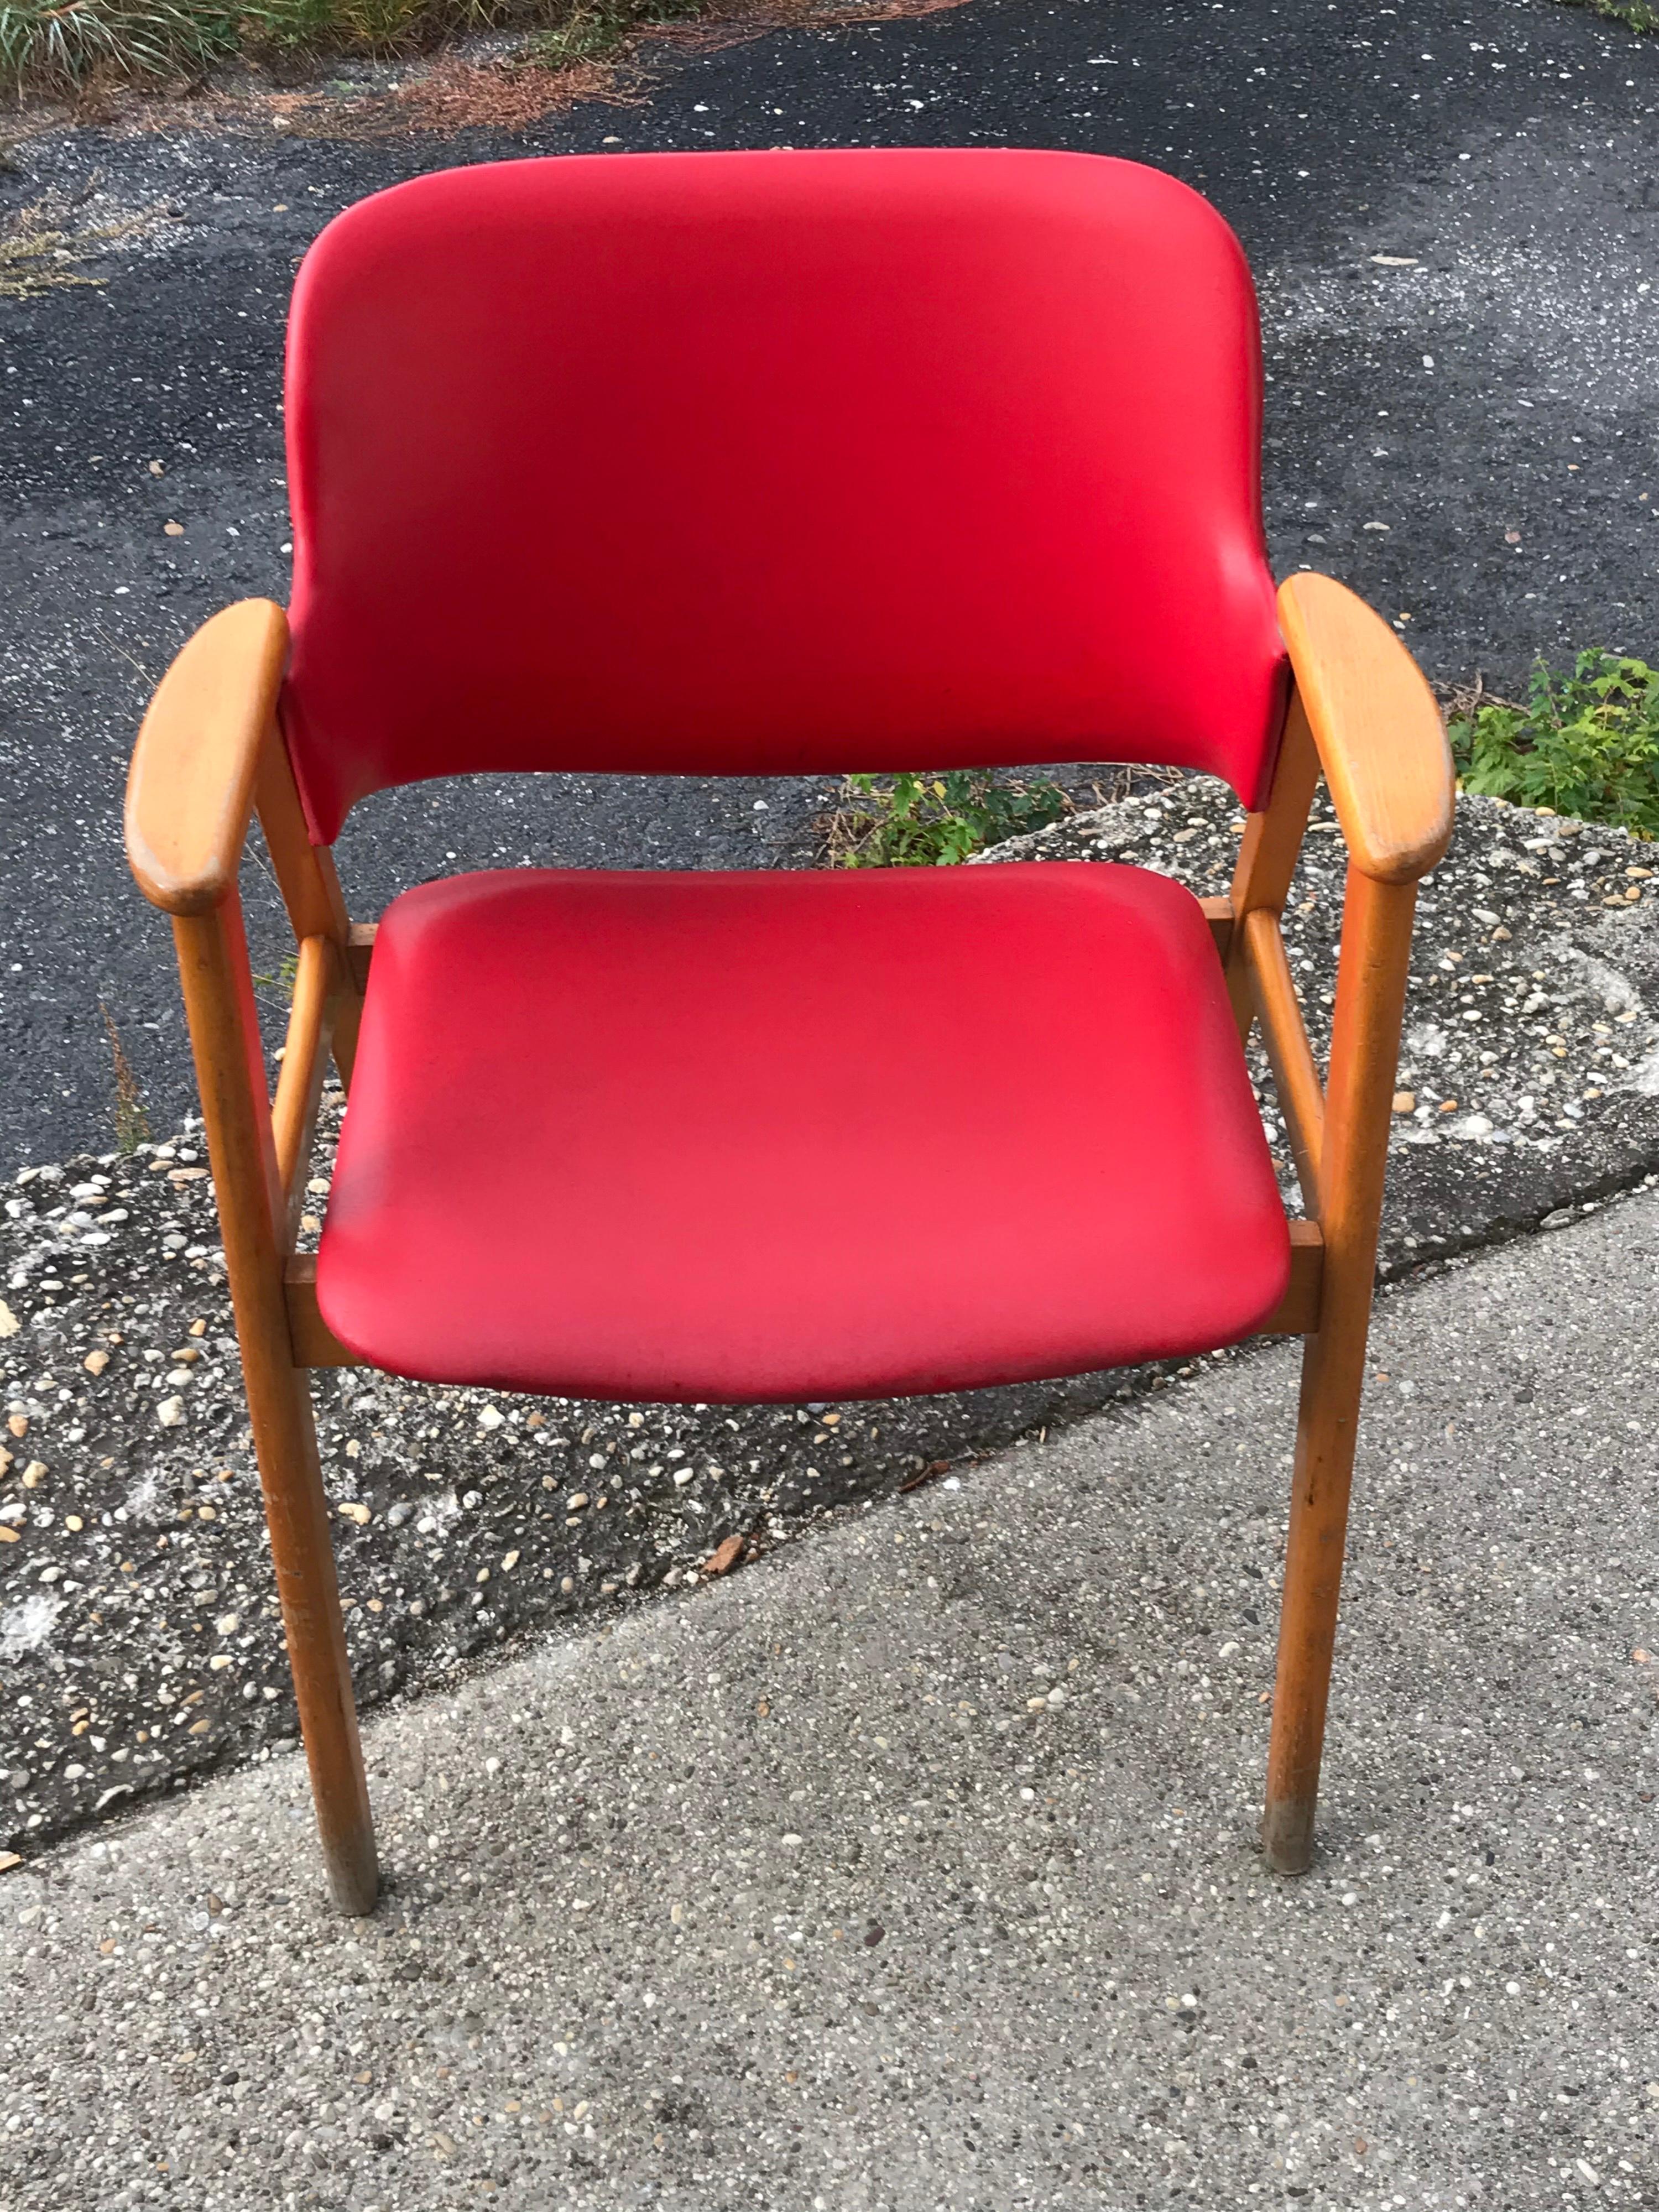 Mid-20th Century Midcentury Hungarian Chair with Red Faux Leather, circa 1960s For Sale